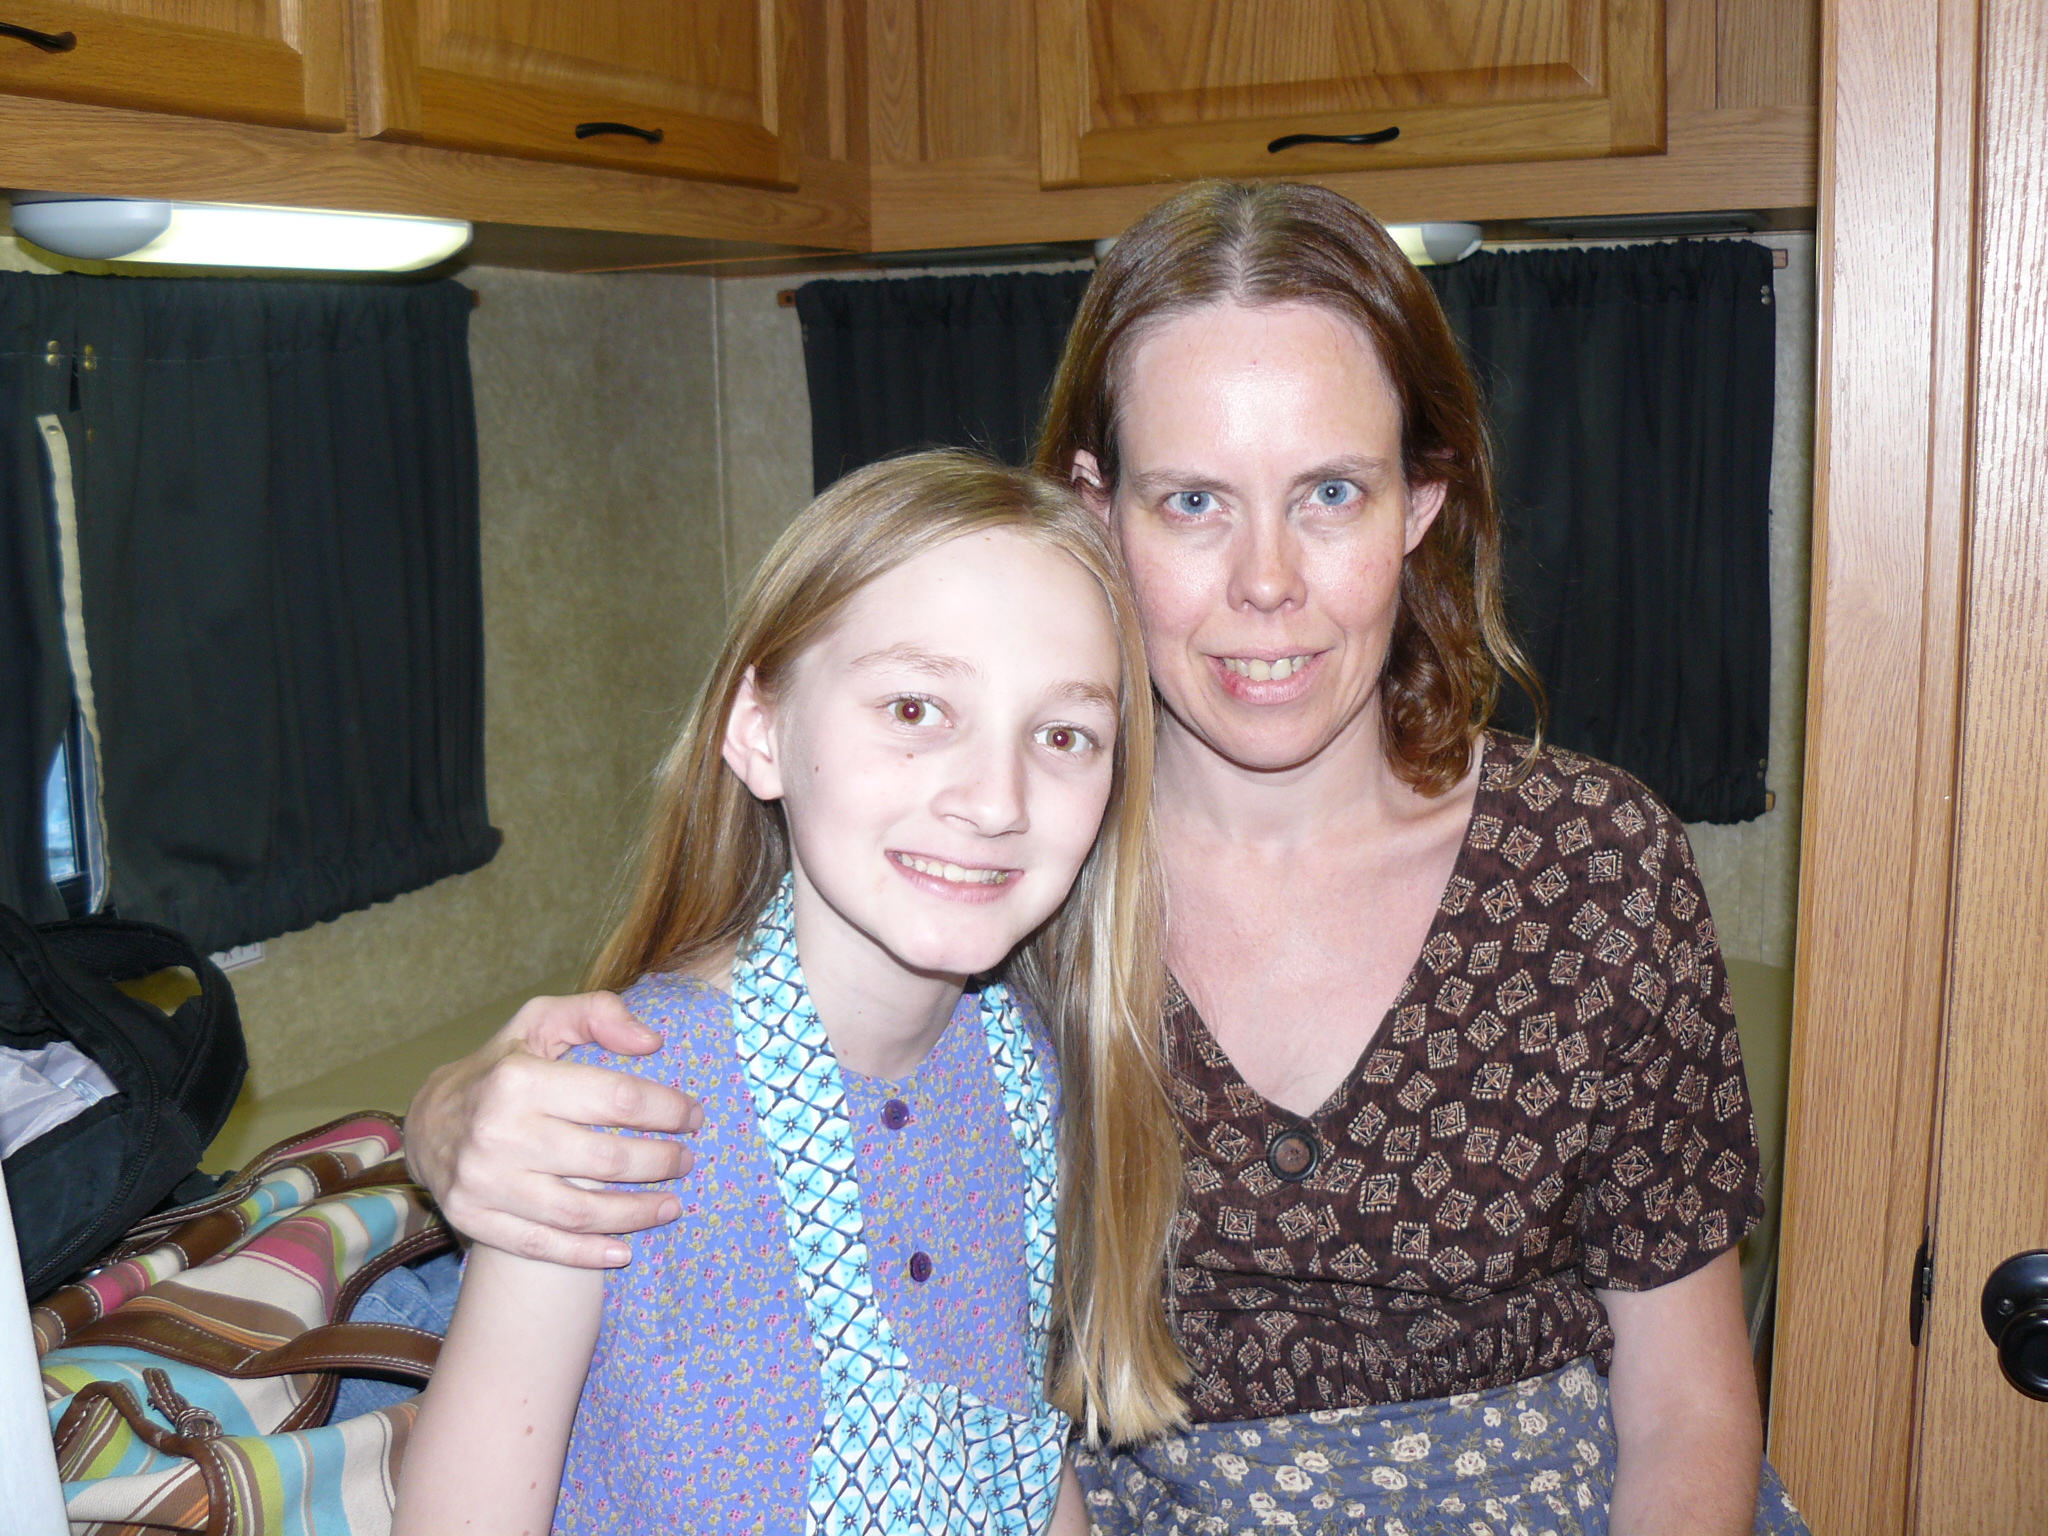 Charlene Geisler playing the role of Emily in the movie 'The Gift' with her film mother Maria Olsen of 